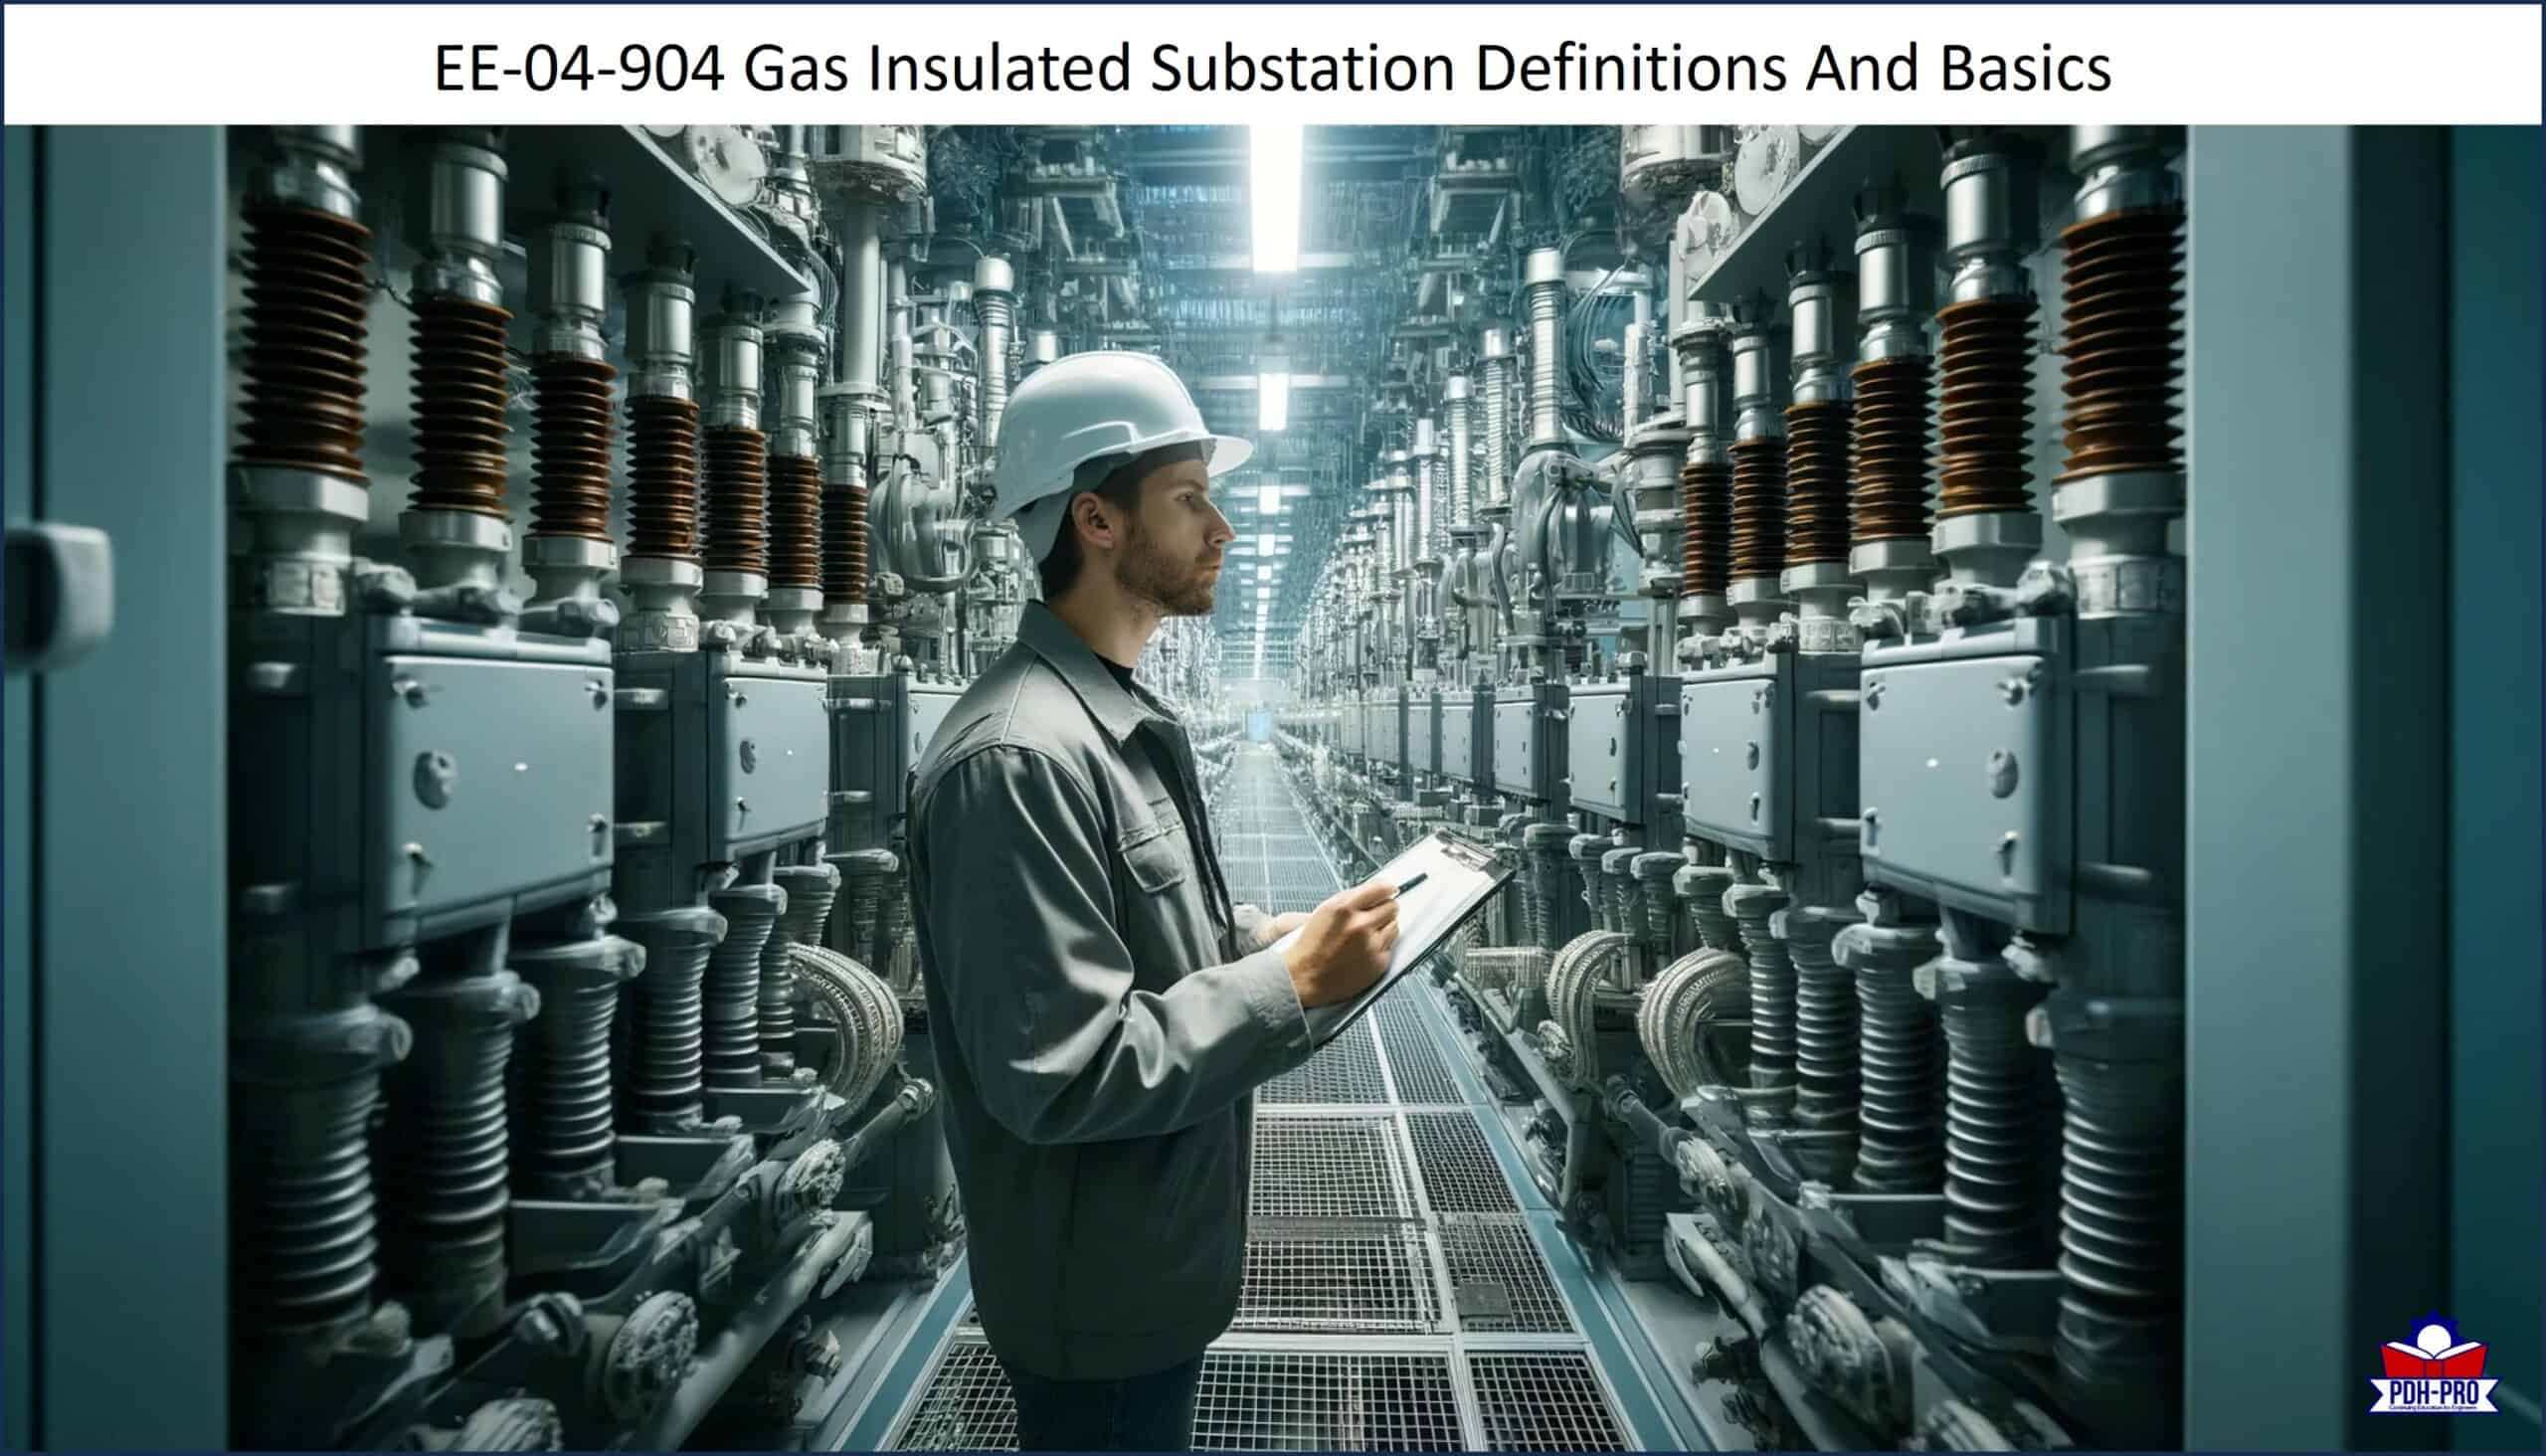 Gas Insulated Substation Definitions And Basics